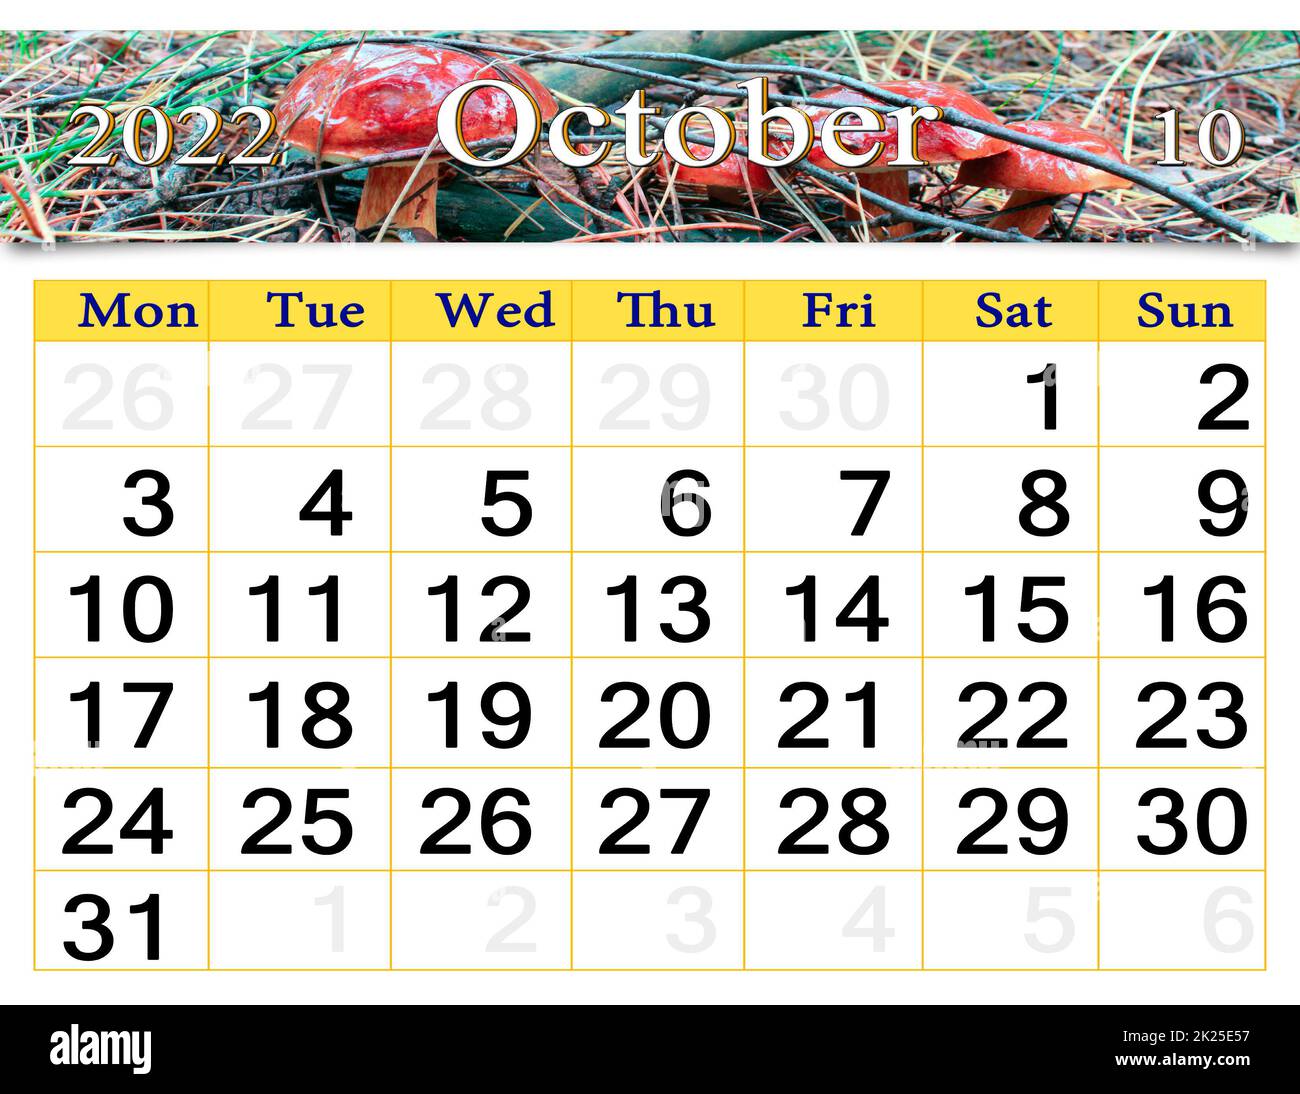 calendar for October 2022 with image of mushroom growing in forest Stock Photo